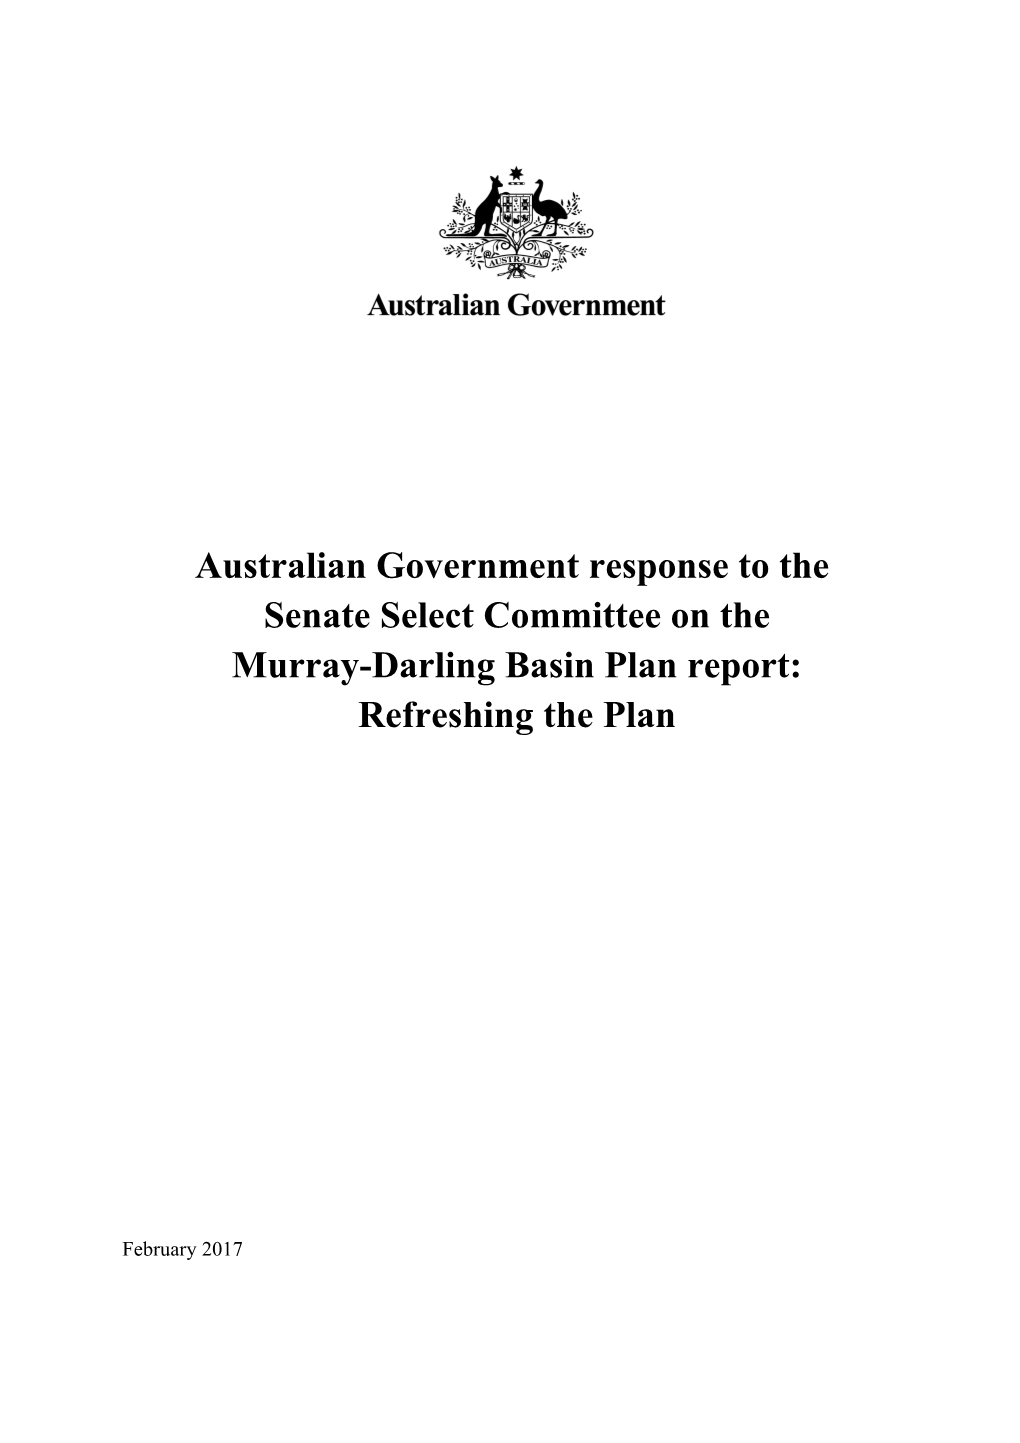 Australian Government Response to the Senate Select Committee on Themurray-Darling Basin